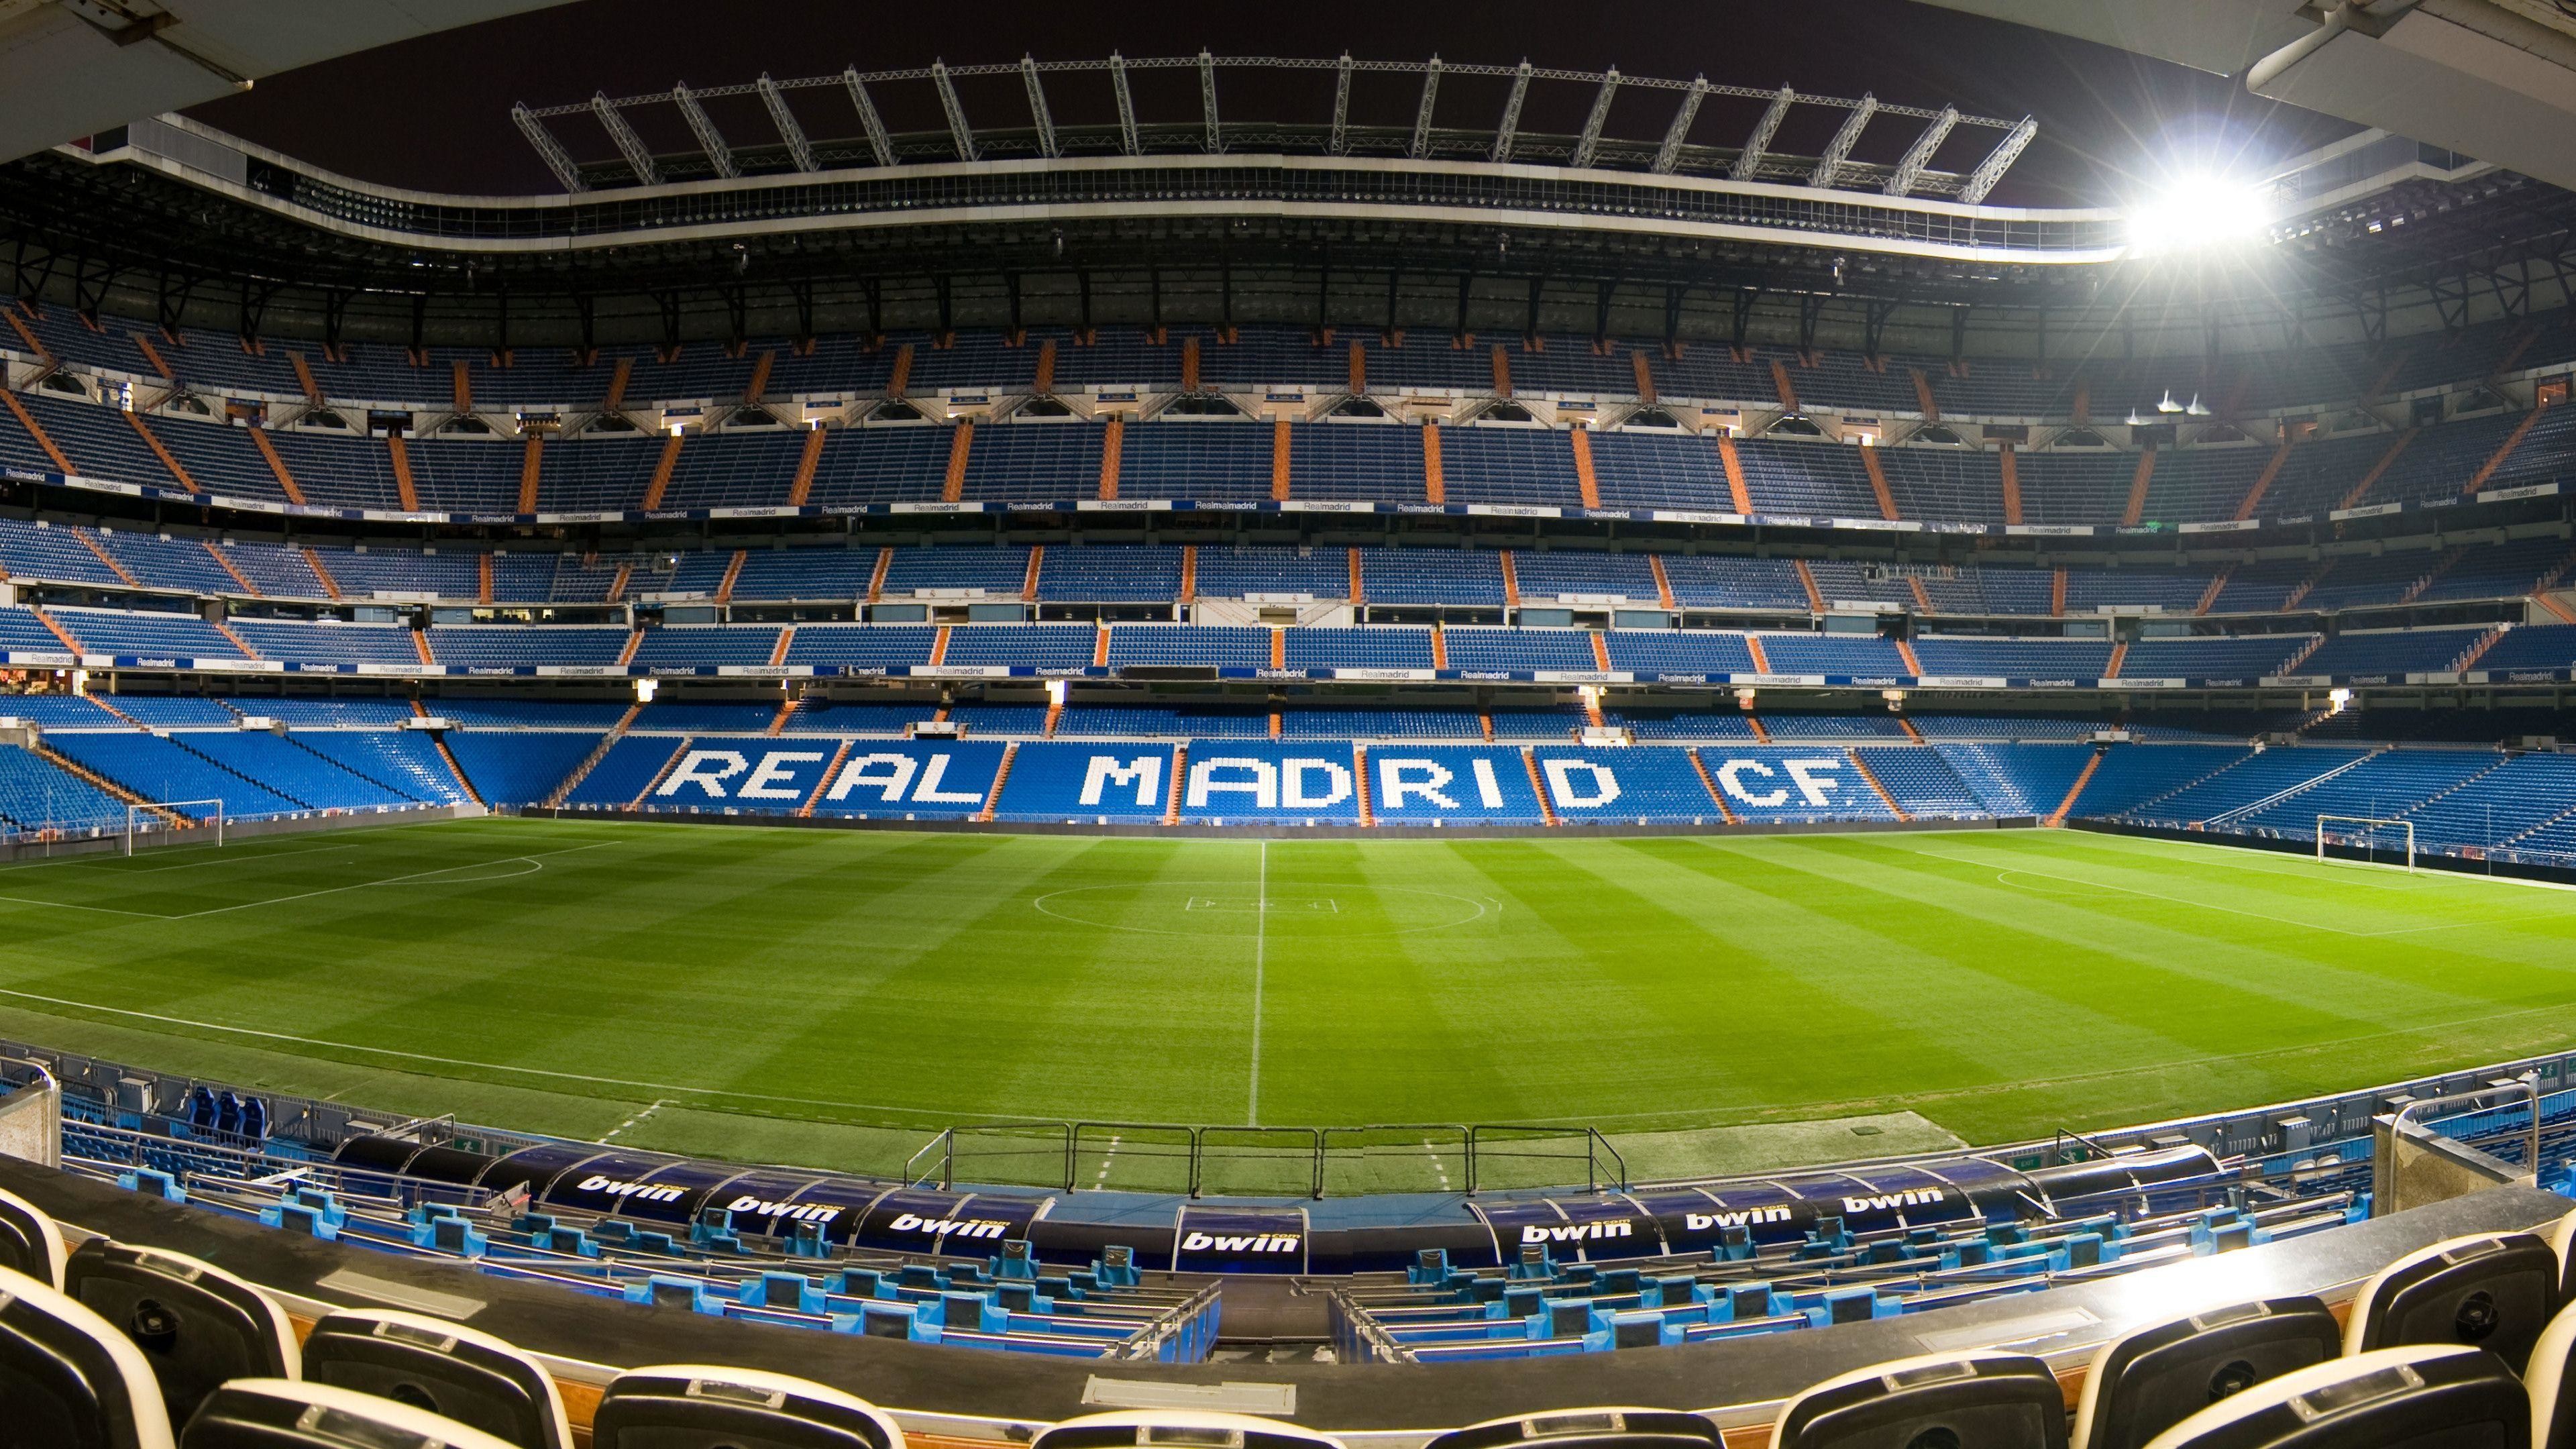 3840x2160 Real Madrid Stadium wallpapers hd | HD Wallpapers, Backgrounds .